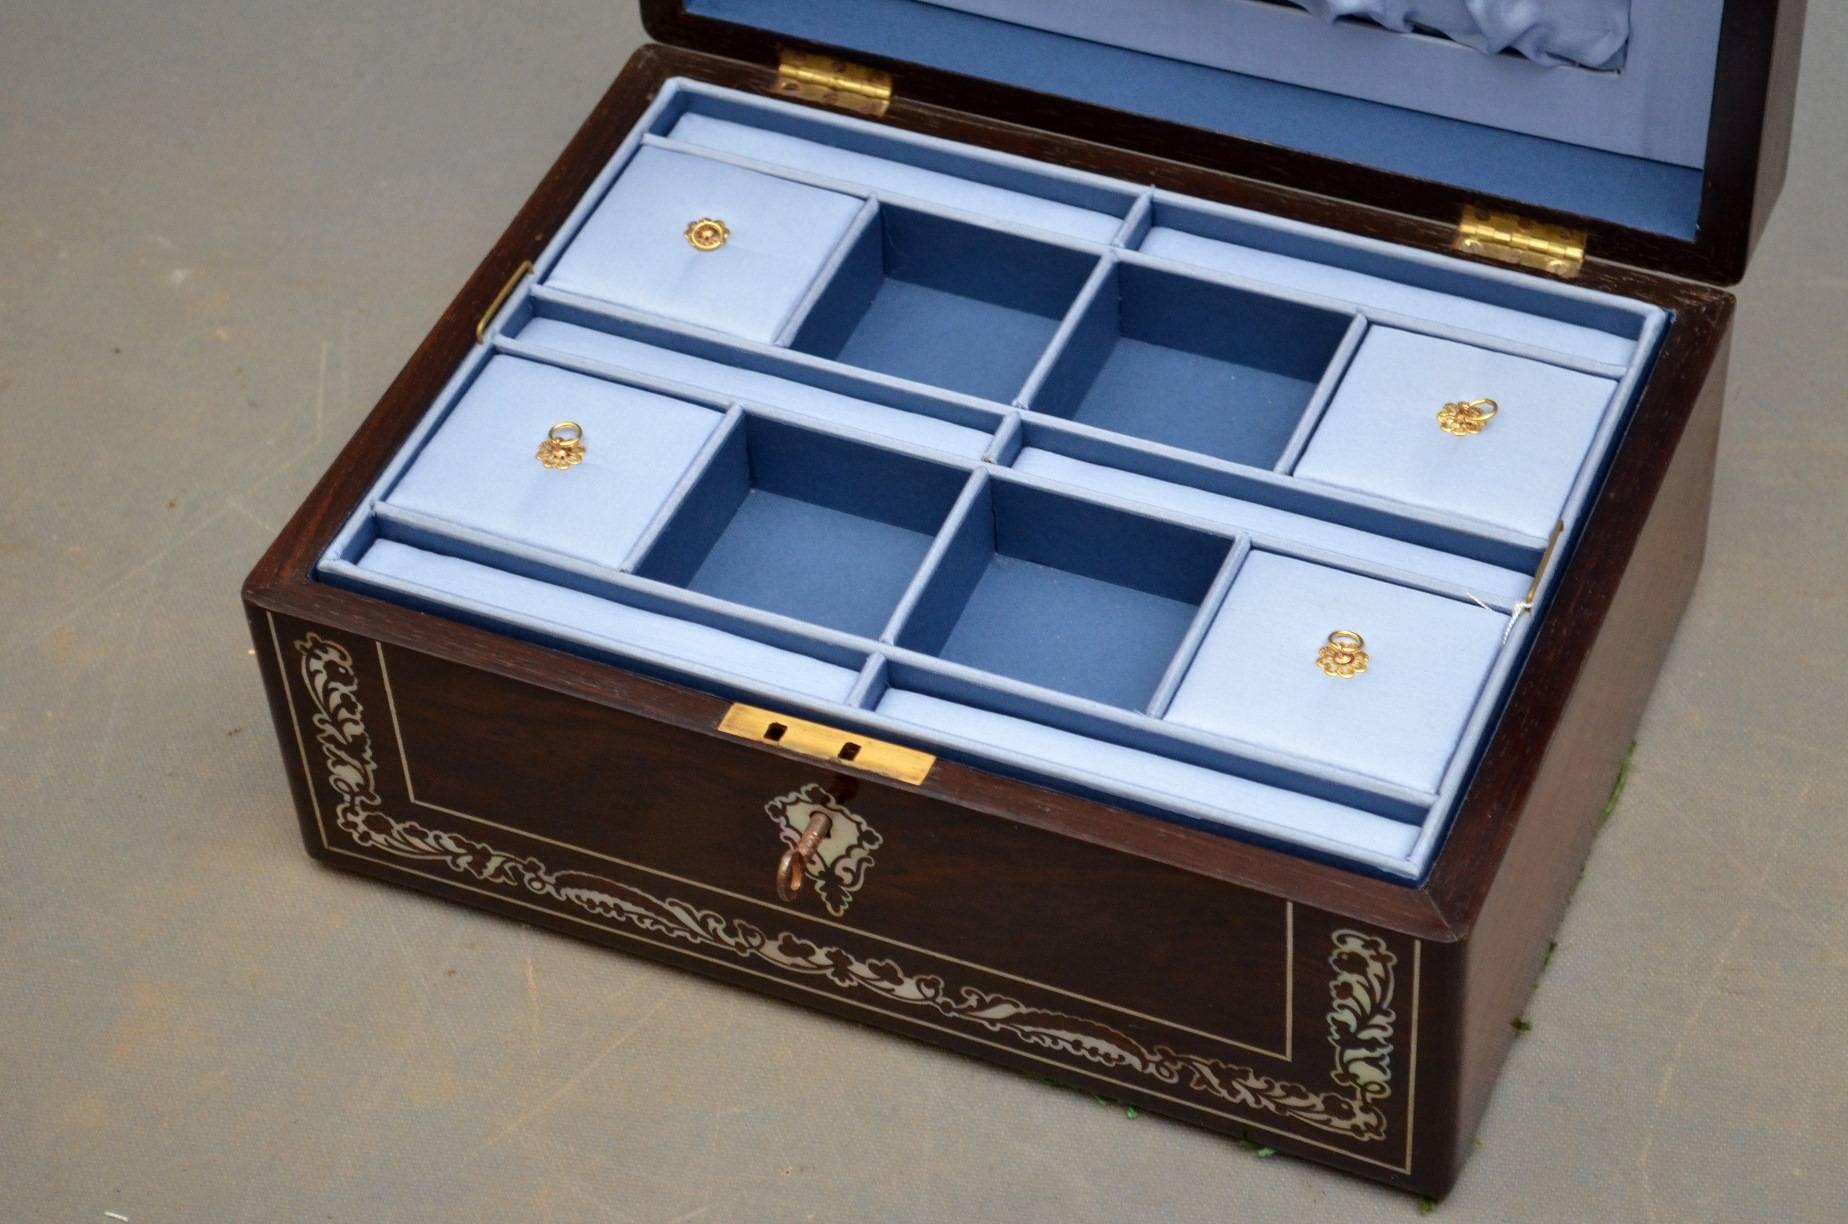 K0191, A superb Regency rosewood and mother-of-pearl jewellery box or sewing box, having profusely inlaid front and hinged top enclosing fabulous relined interior, all fitted with original working lock and key. This beautiful box is in fantastic